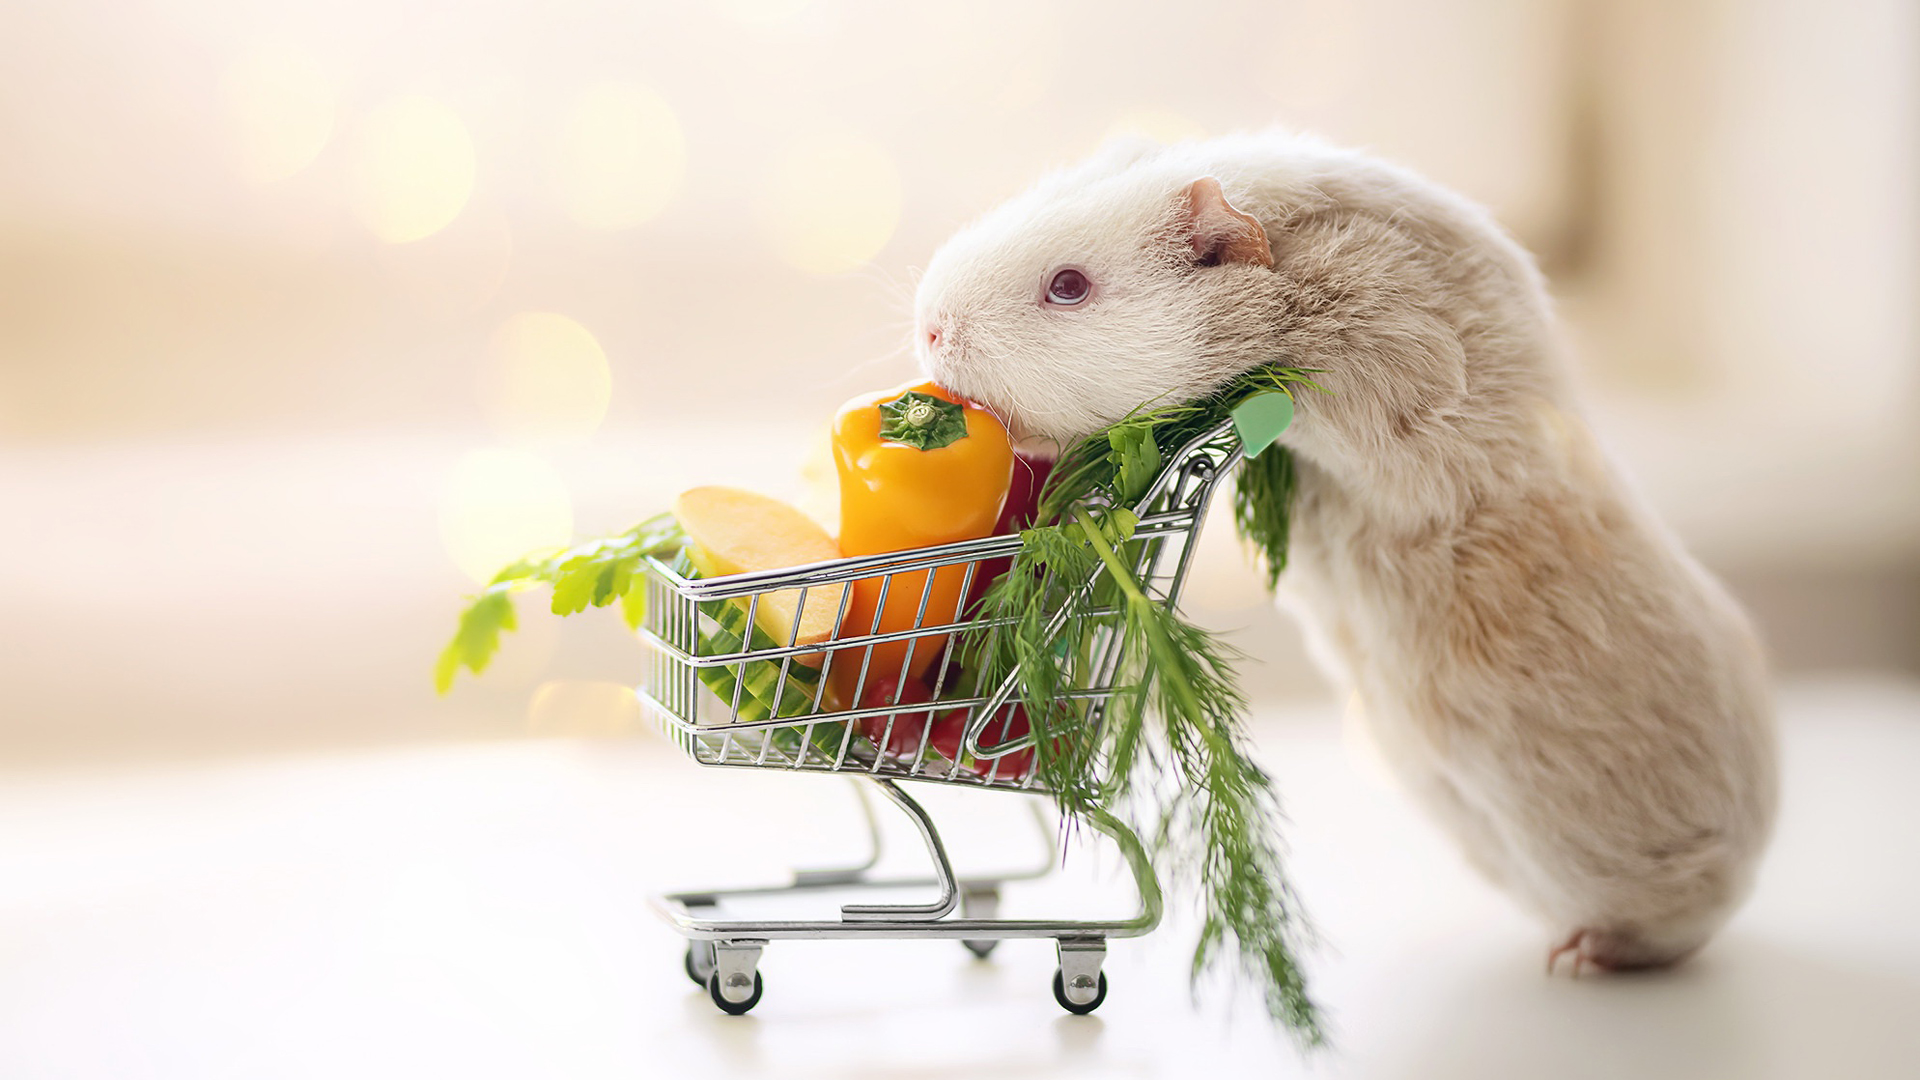 Guinea Pig Is Standing With Vegetable Cart In Blur White Wallpaper 2K Animals